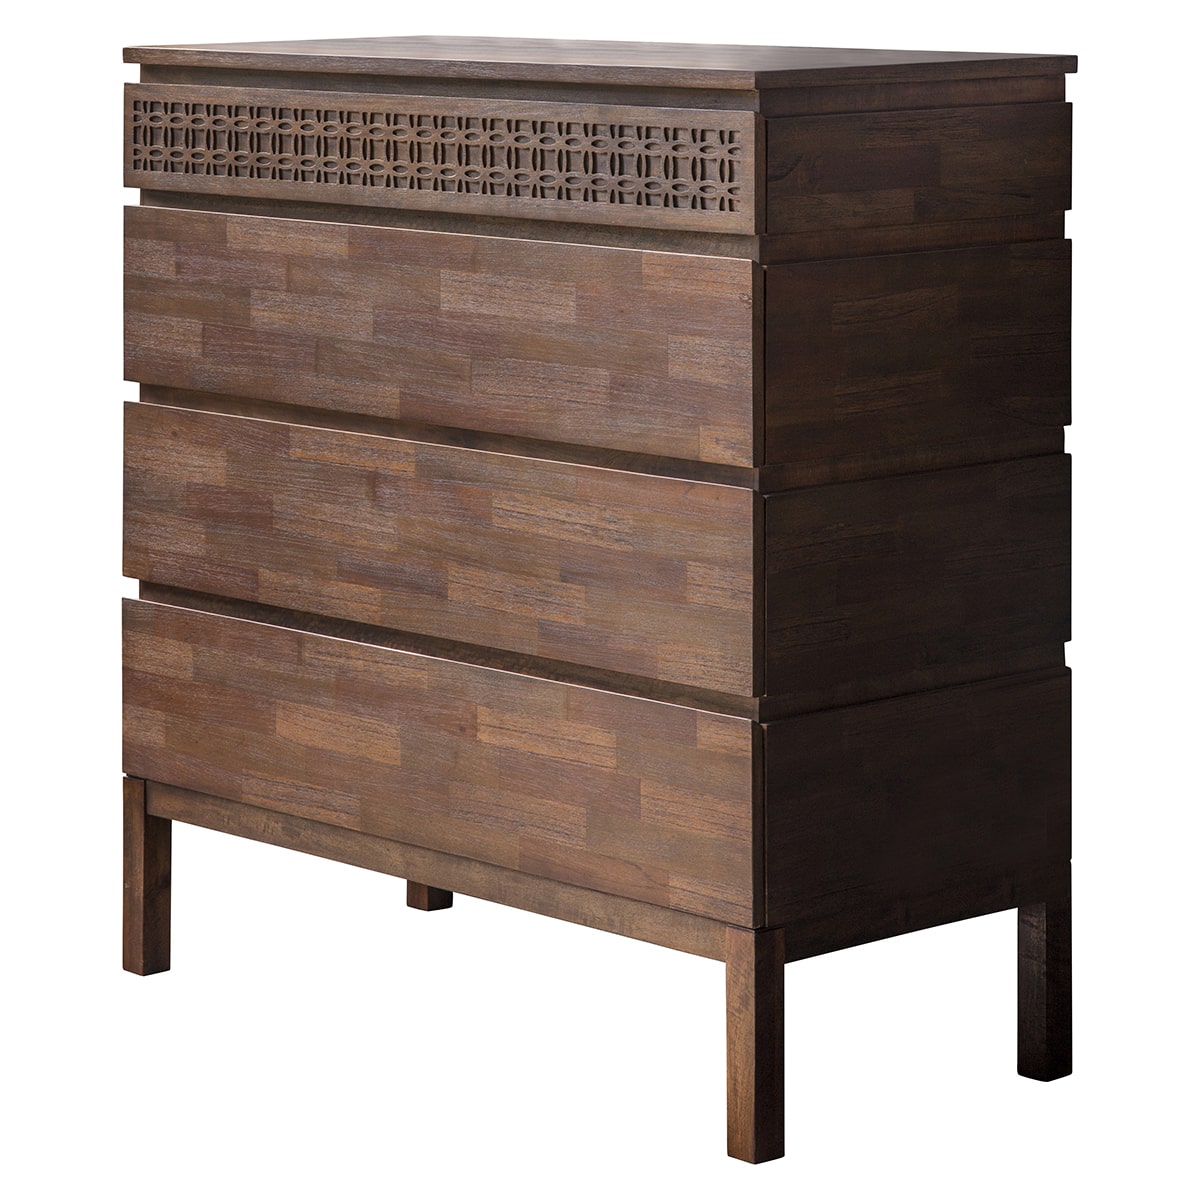 Product picture of the 4 drawer chest showing the beautiful wood work on the top drawer and mosaic of veneers on other drawers. 